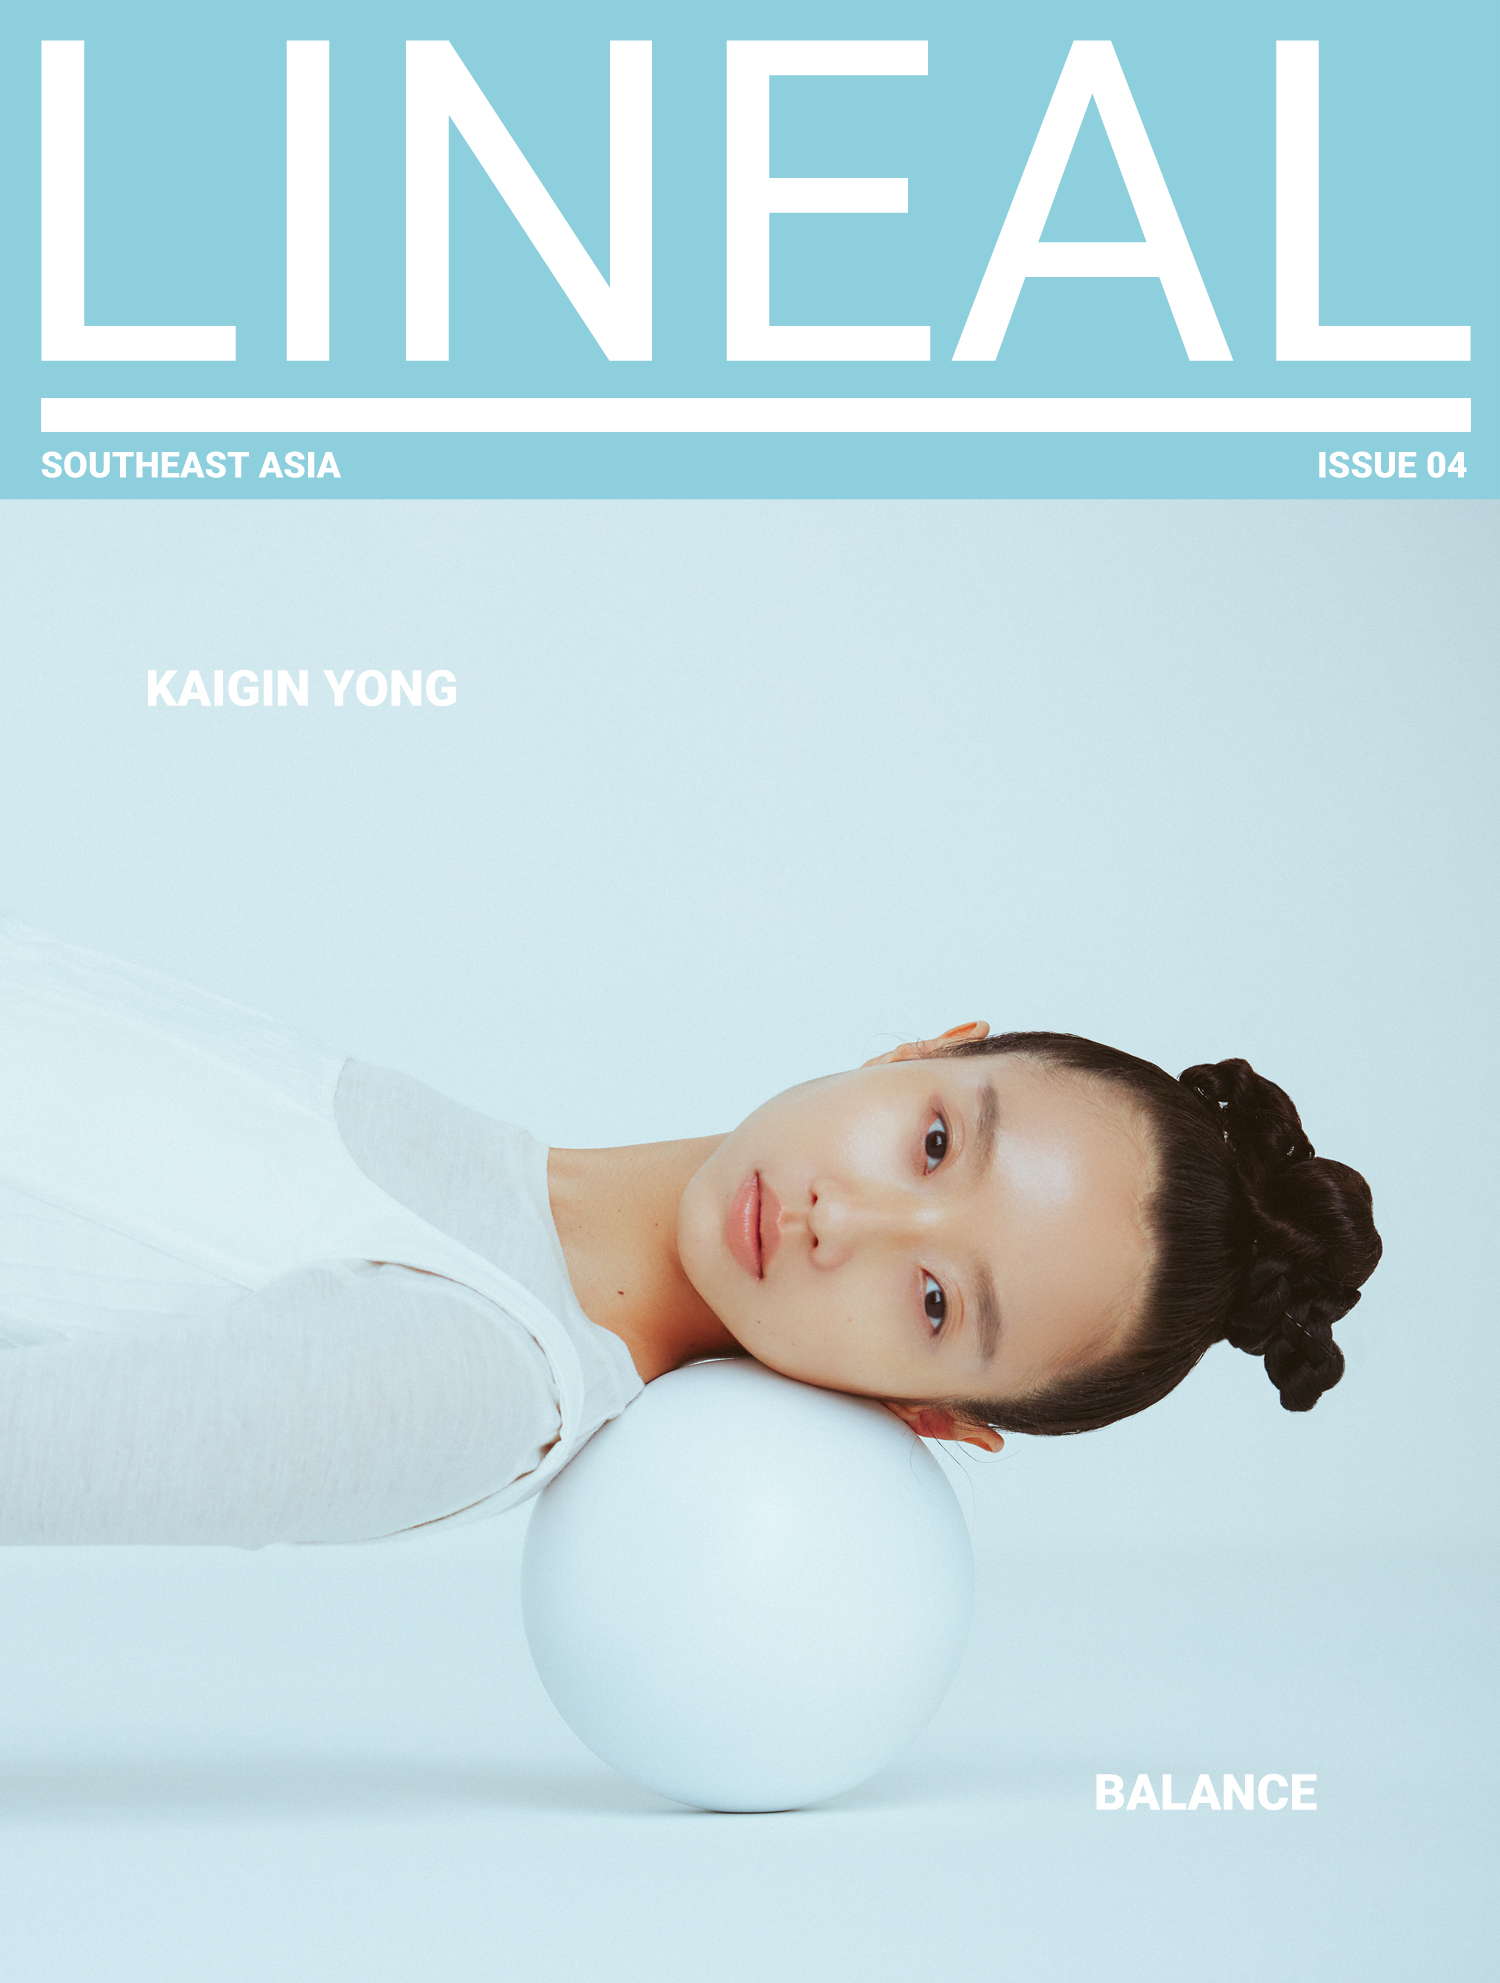 Kaigin Yong for LINEAL Issue No. 4